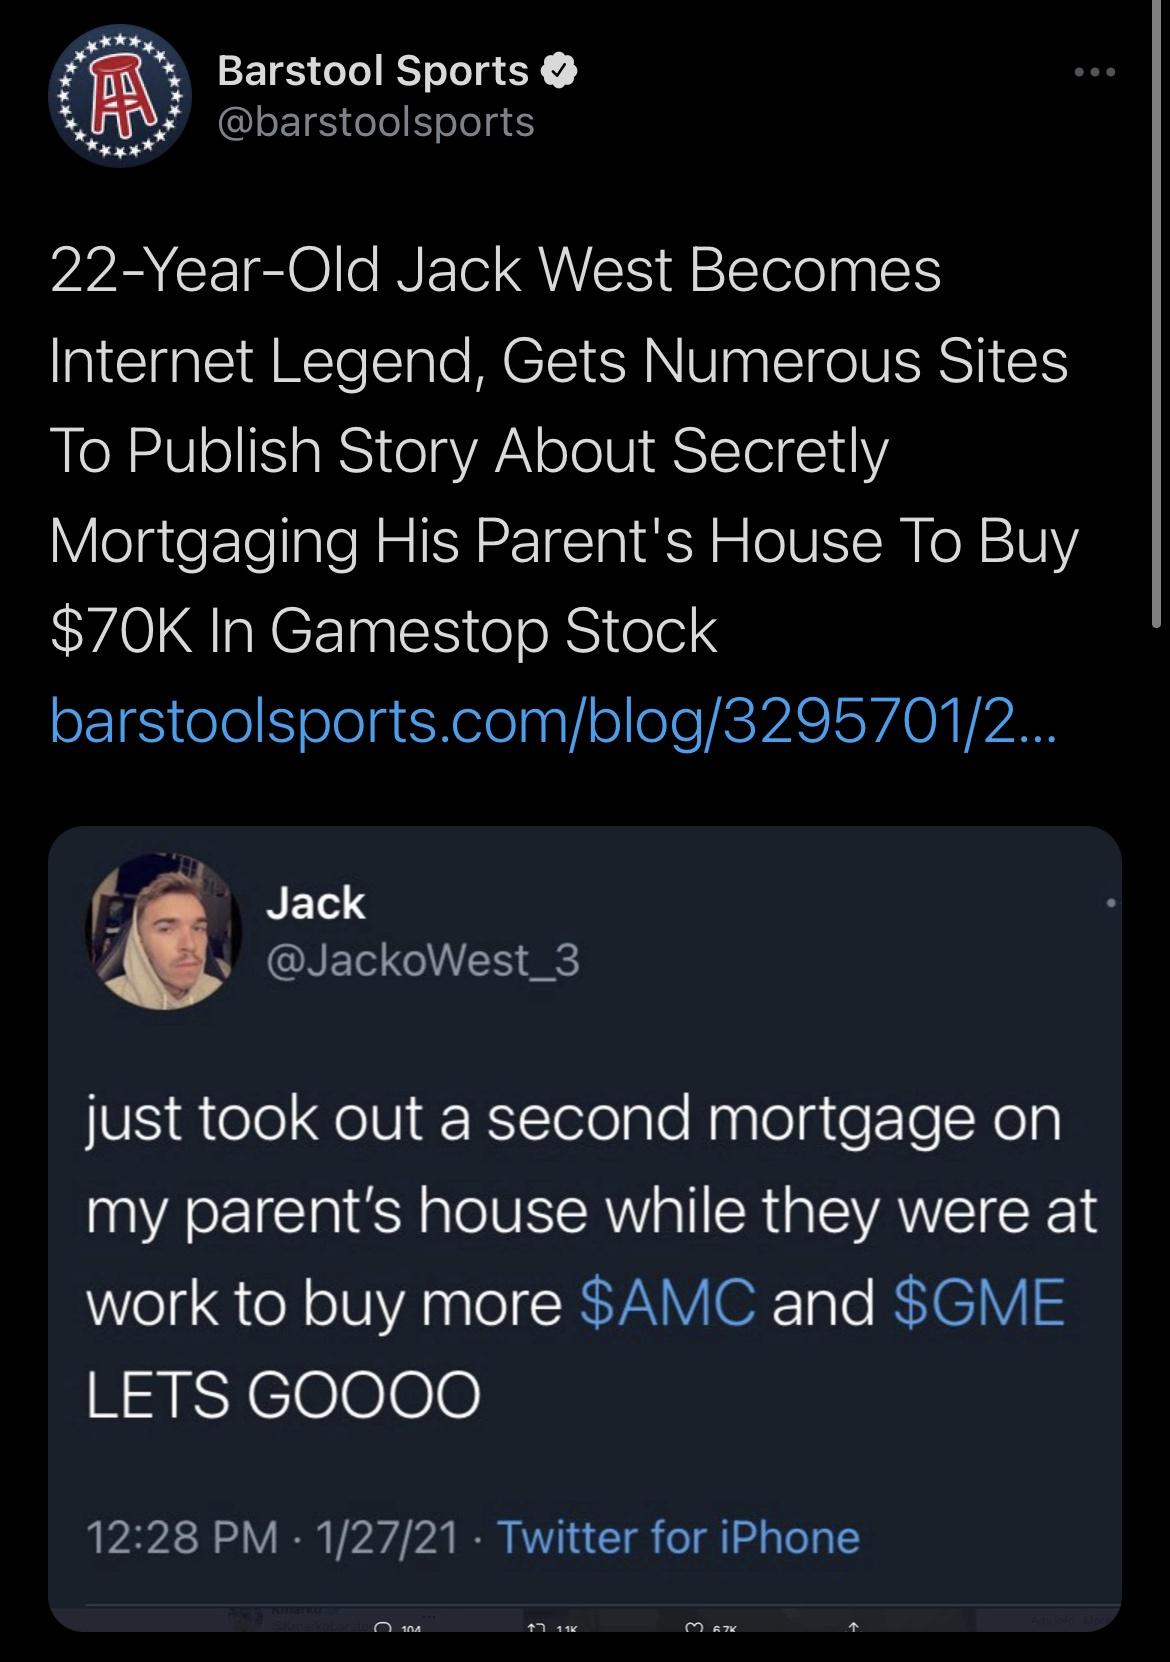 screenshot - 215 Al Barstool Sports 22YearOld Jack West Becomes Internet Legend, Gets Numerous Sites To Publish Story About Secretly Mortgaging His Parent's House To Buy $70K In Gamestop Stock barstoolsports.comblog32957012... Jack just took out a second 